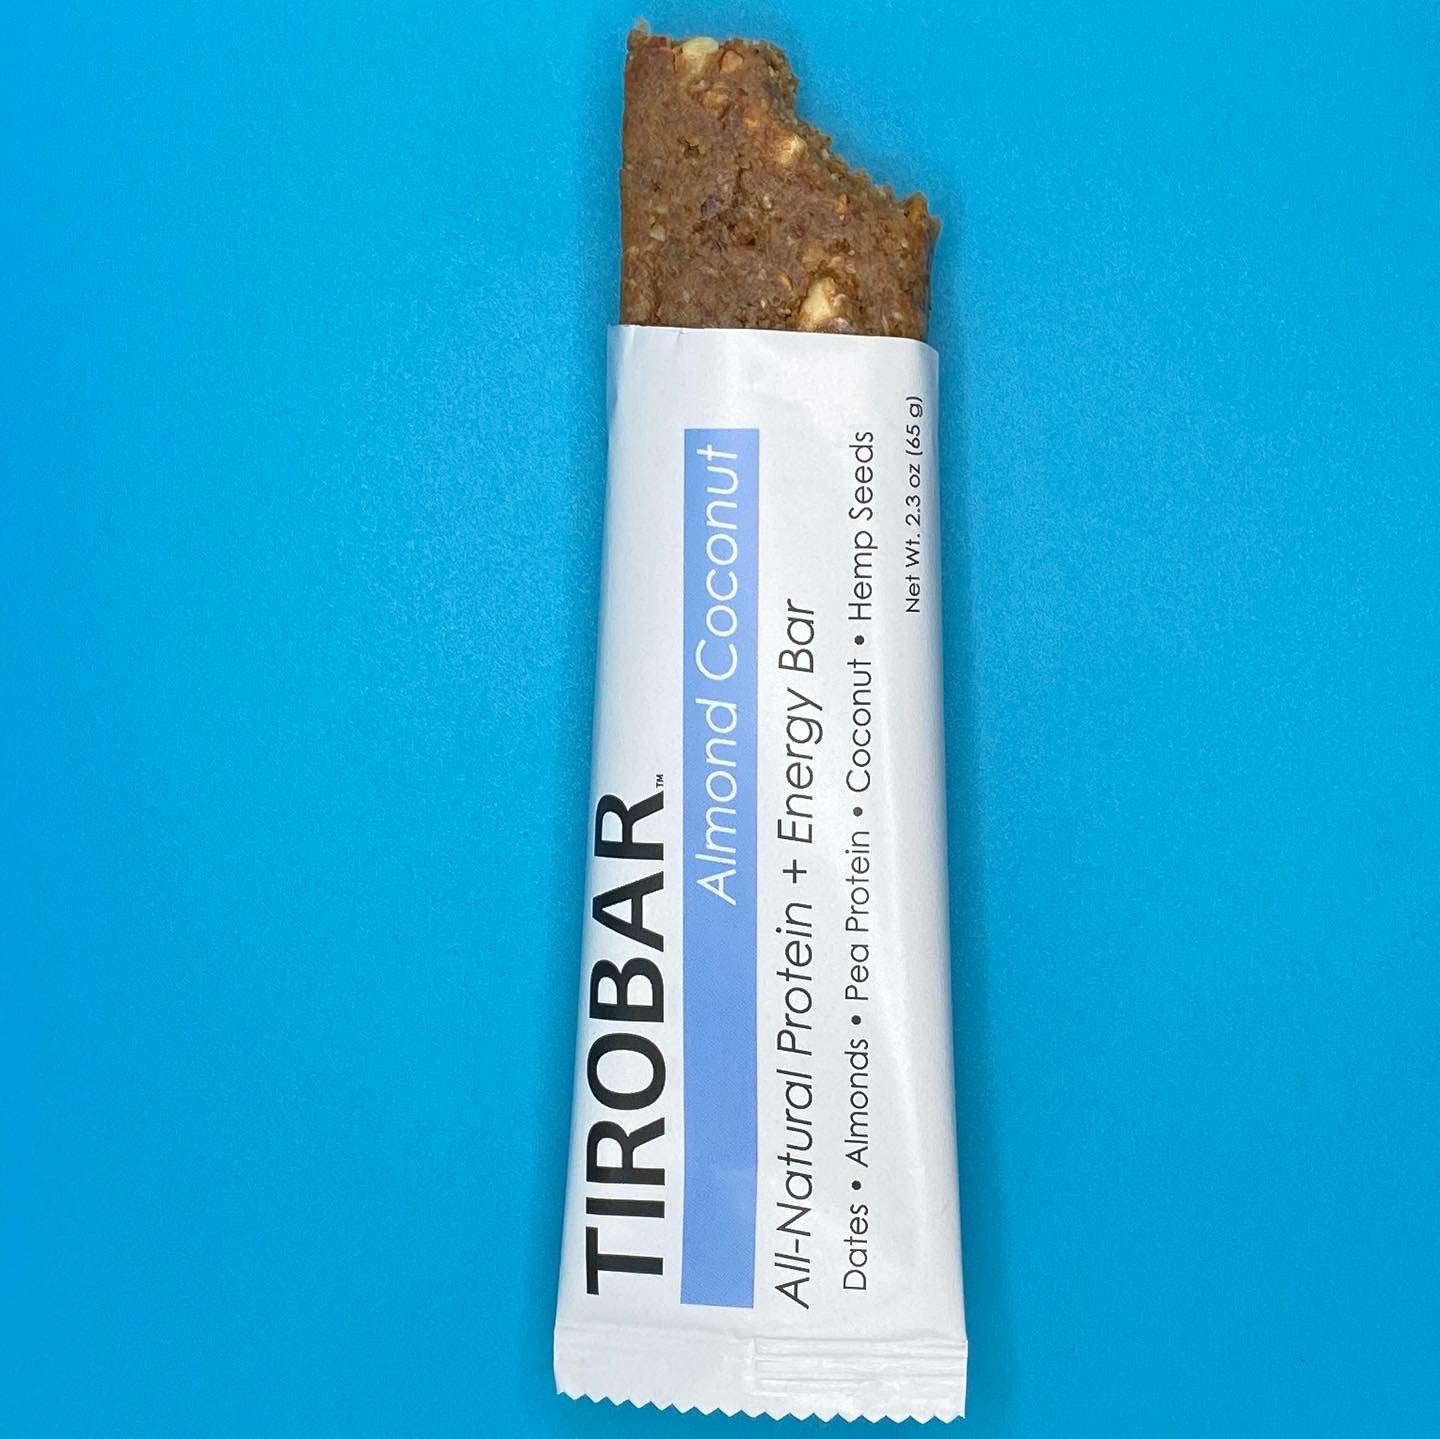 An almond coconut TIROBAR, a vegan and all natural protein bar, sits in a white wrapper against a blue background. The bar is visible from the top, showing the almonds, coconuts, and consistency of the protein bar. 